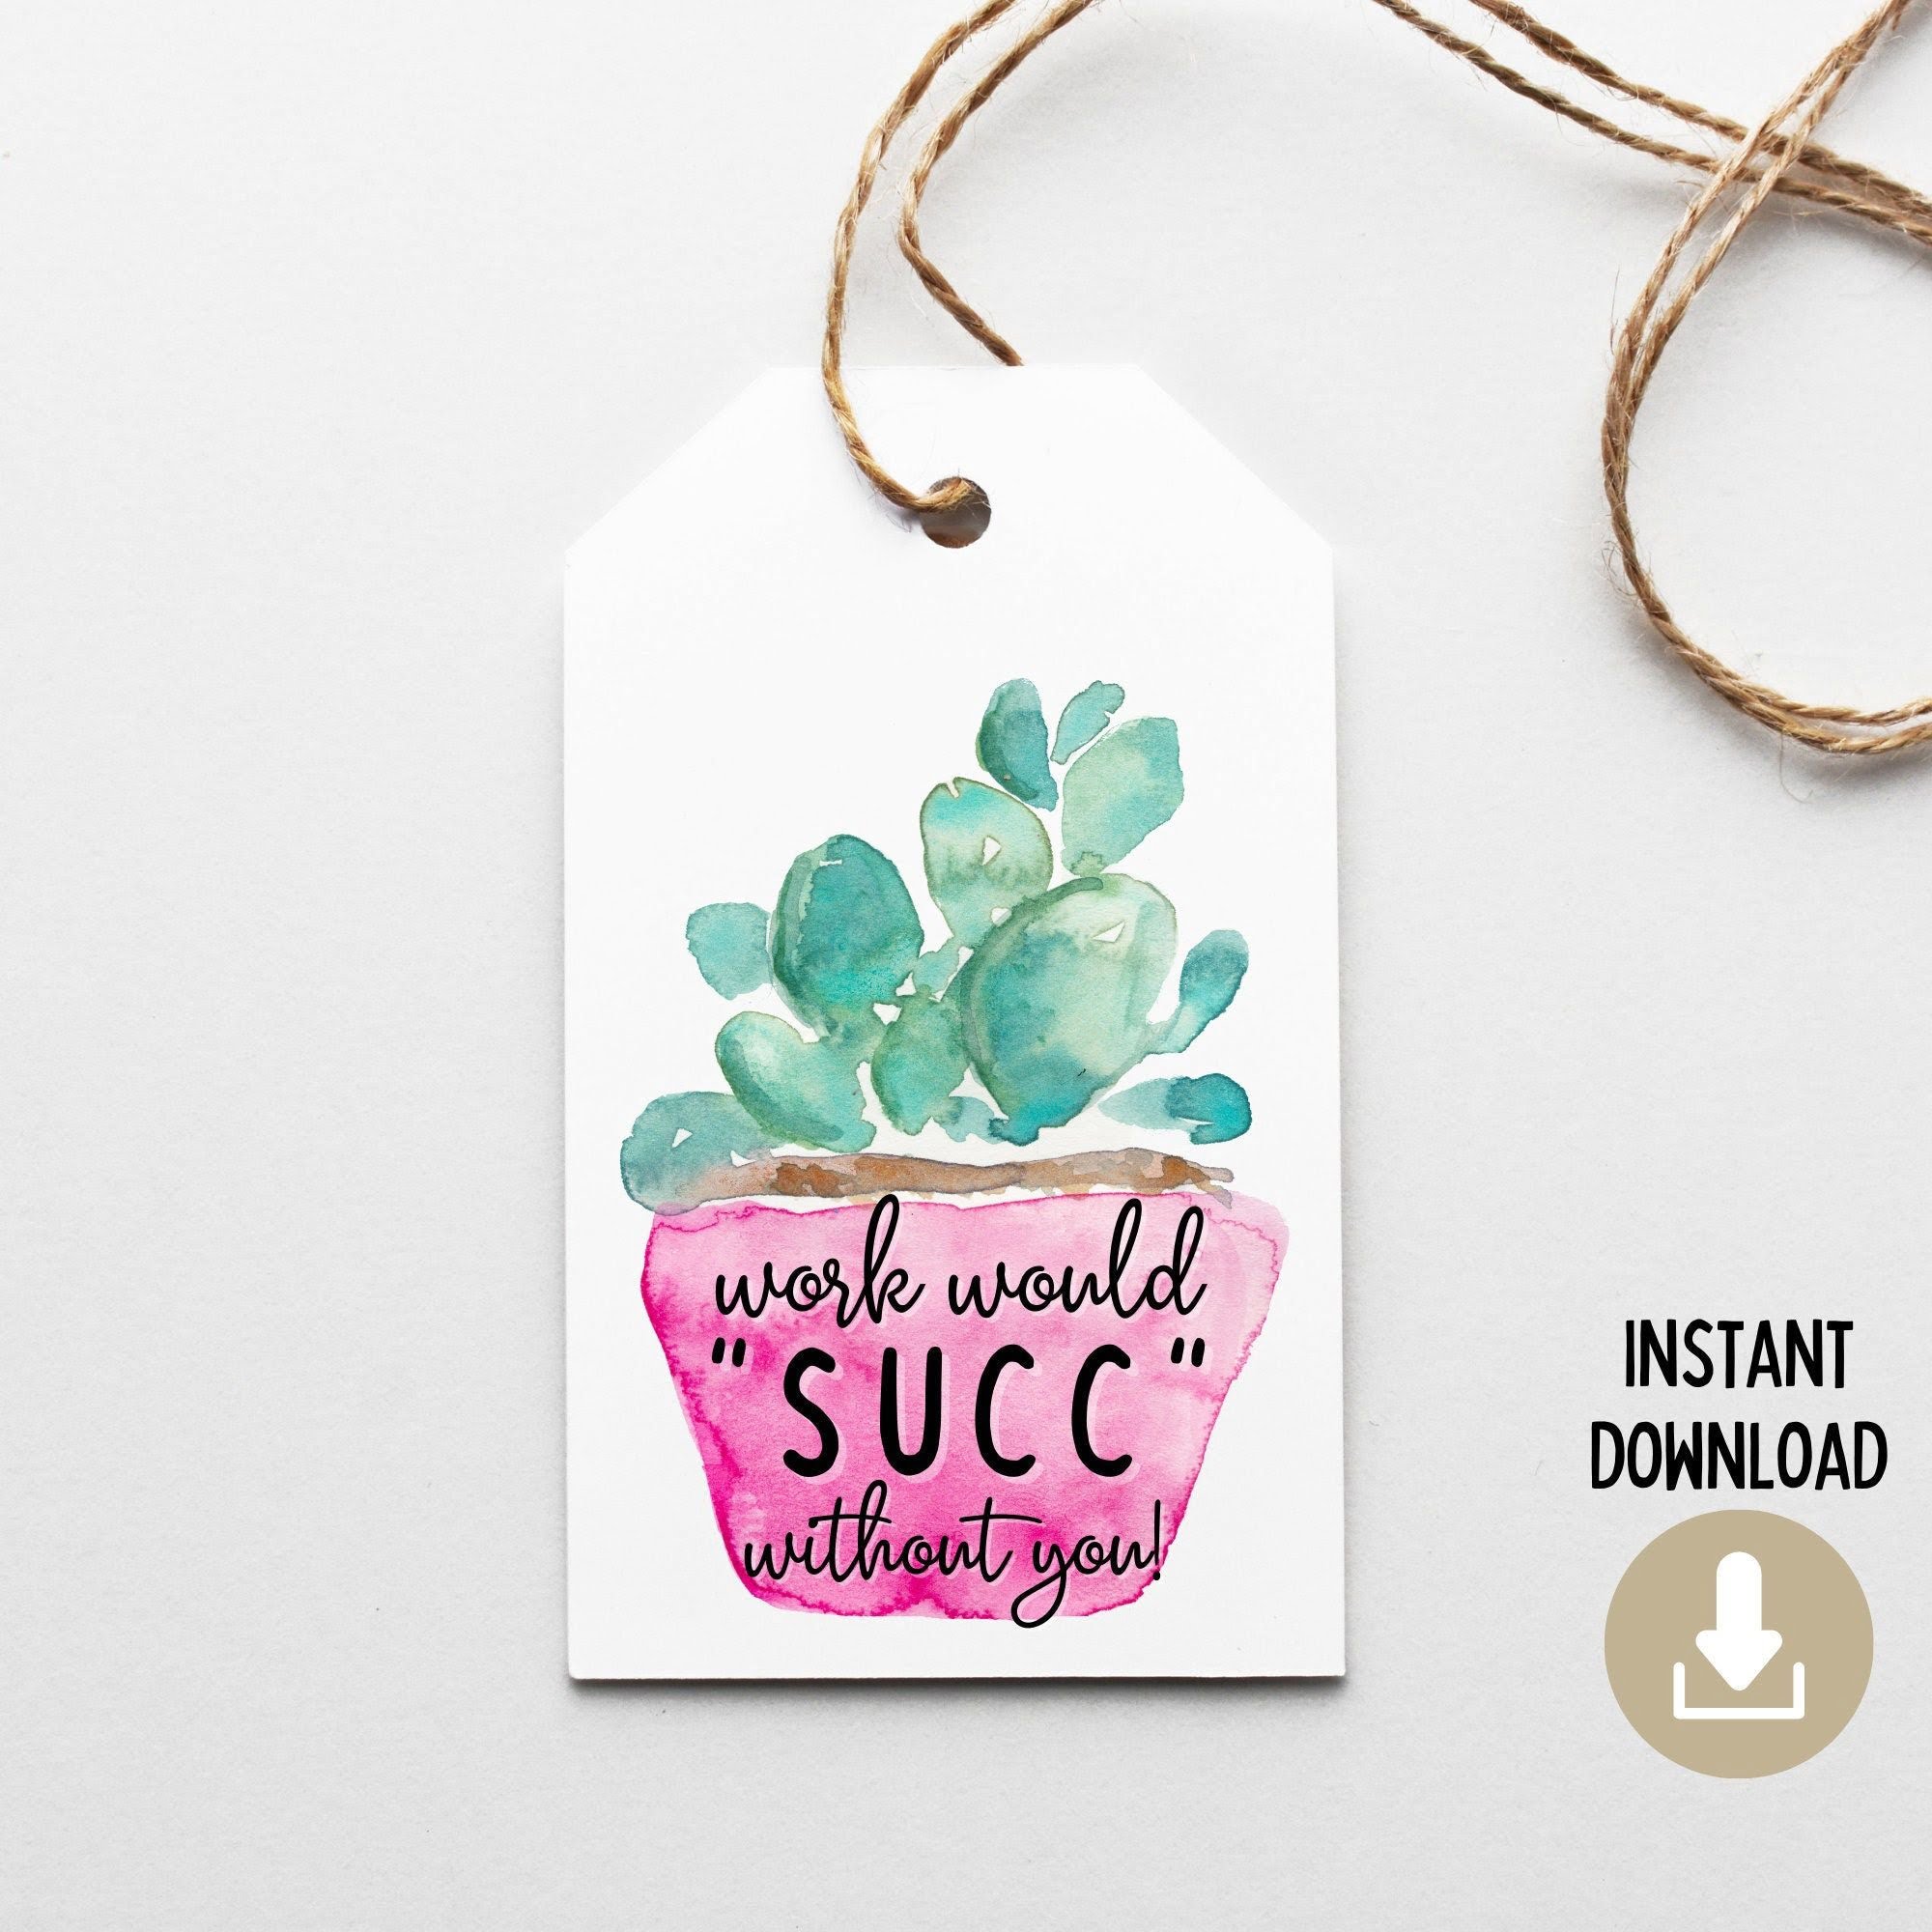 Work Would Succ Without You Printable Free Printable